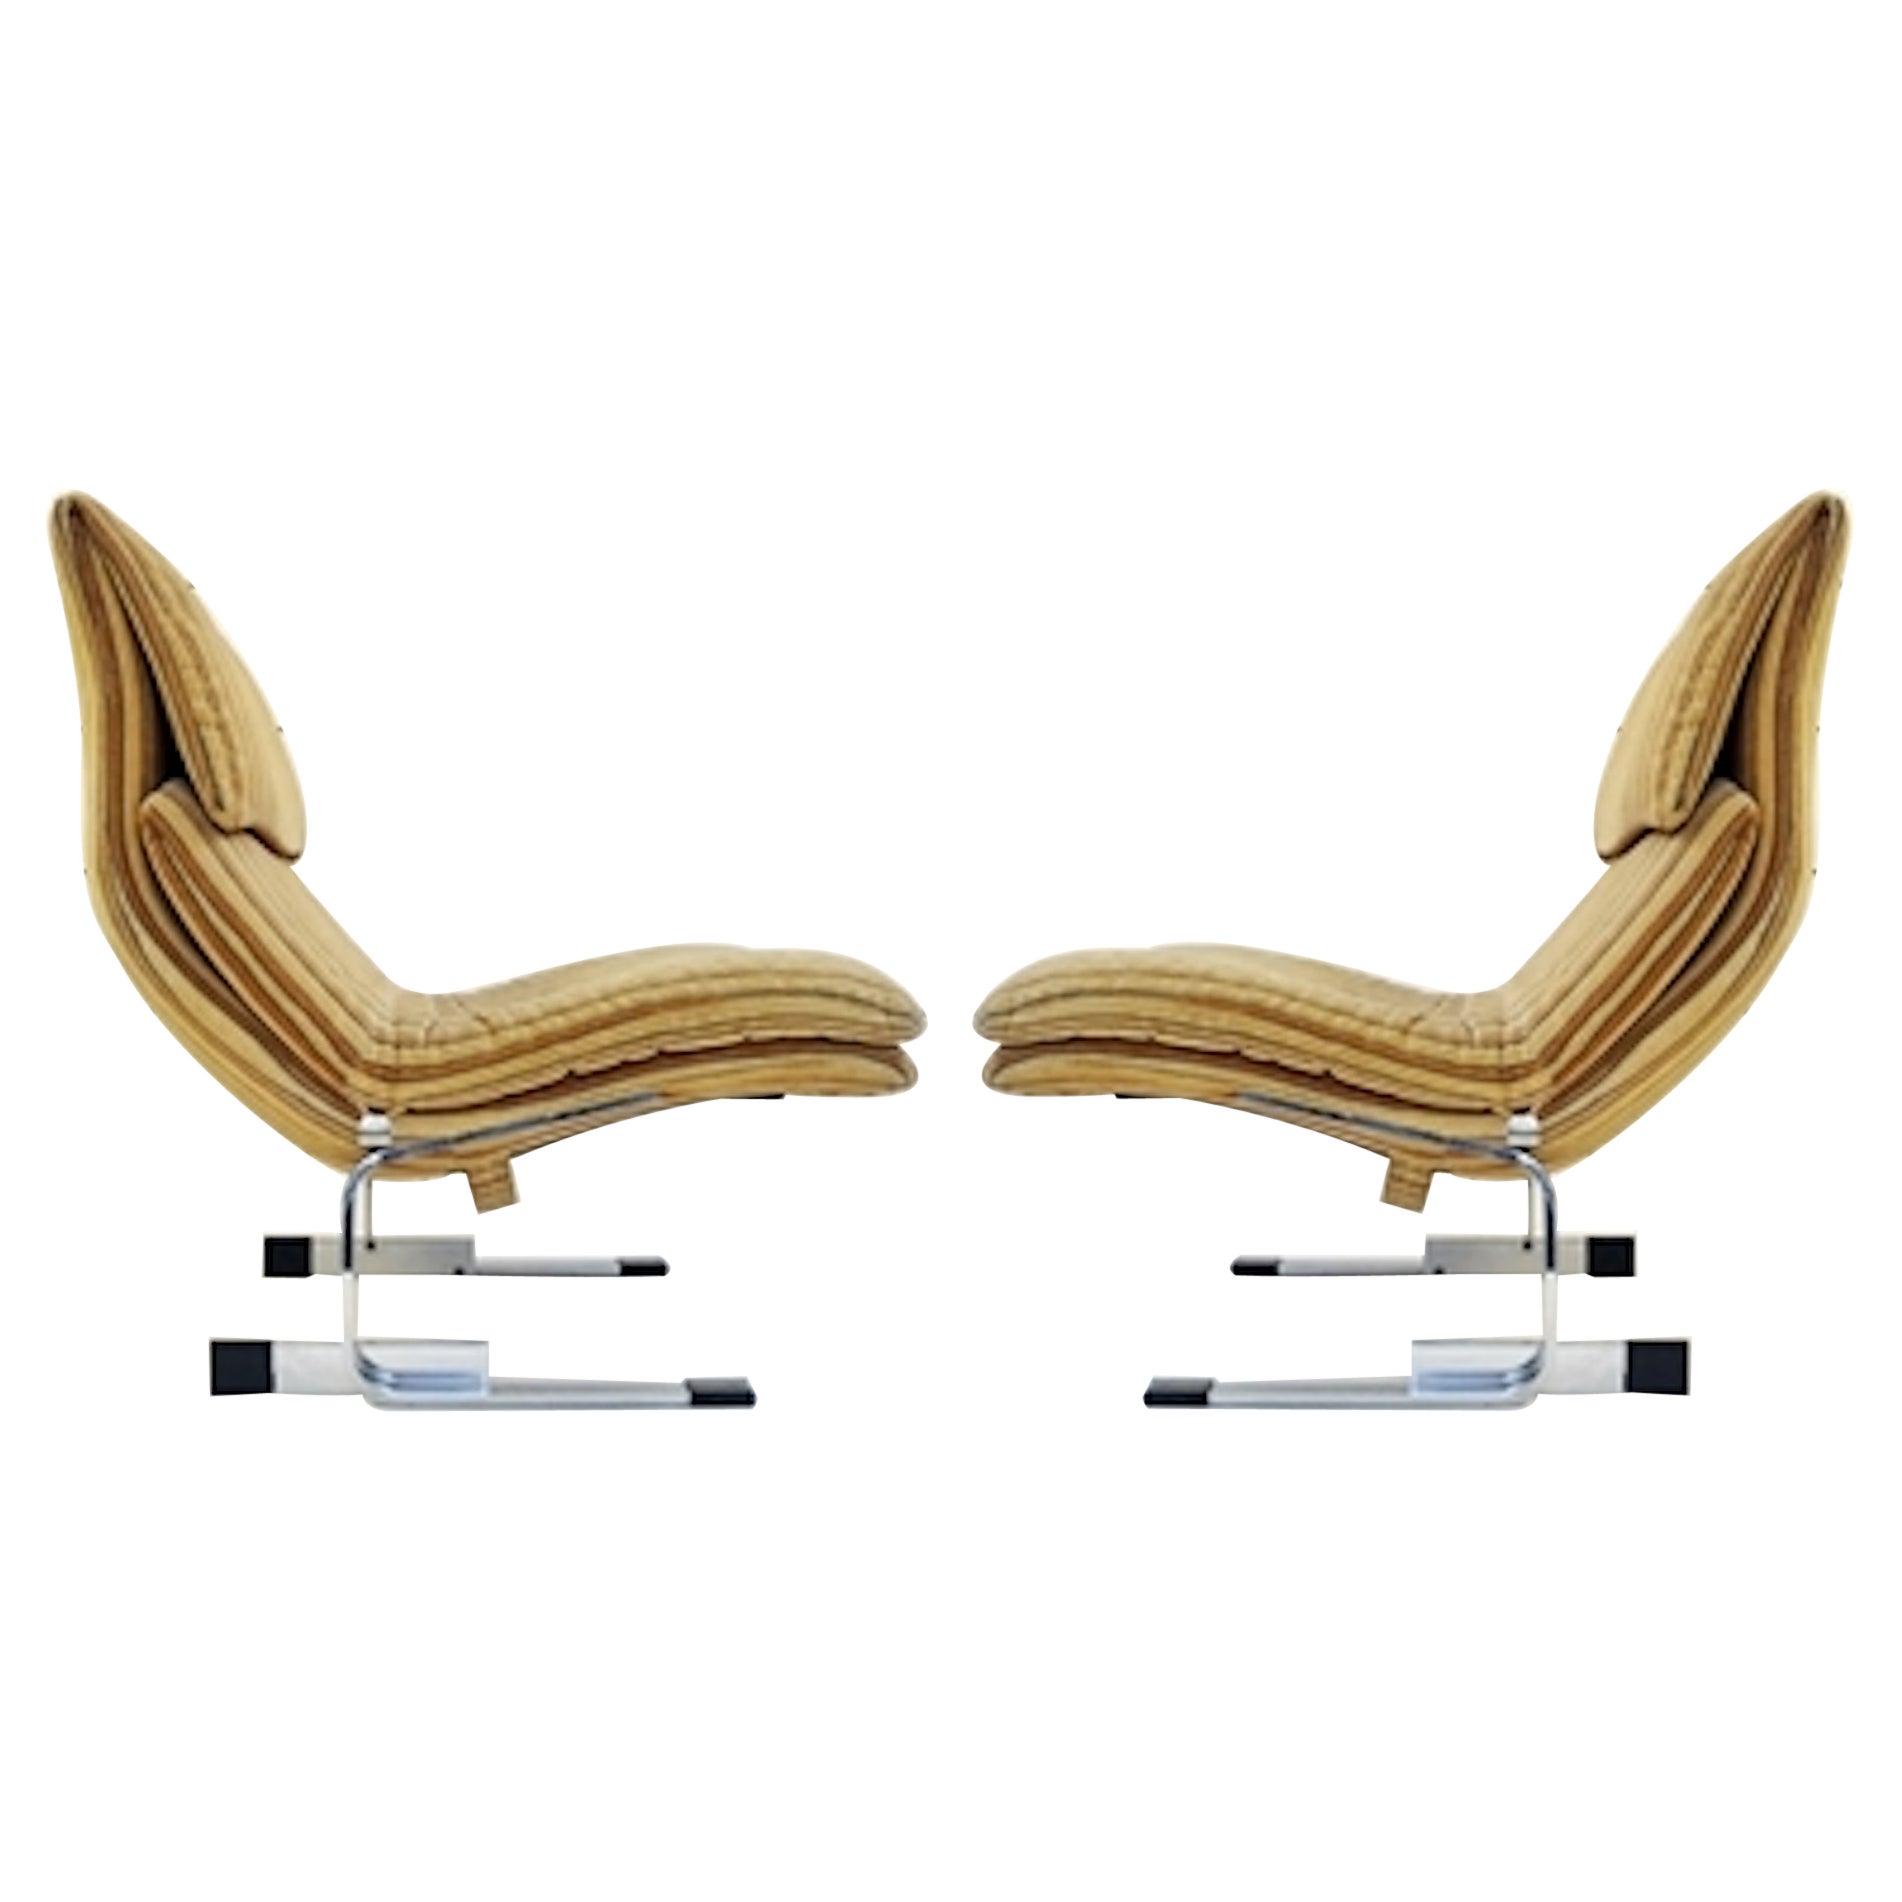 Pair of Mid-Century Lounge Chairs by Giovanni Offredi for Saporiti, 1970s